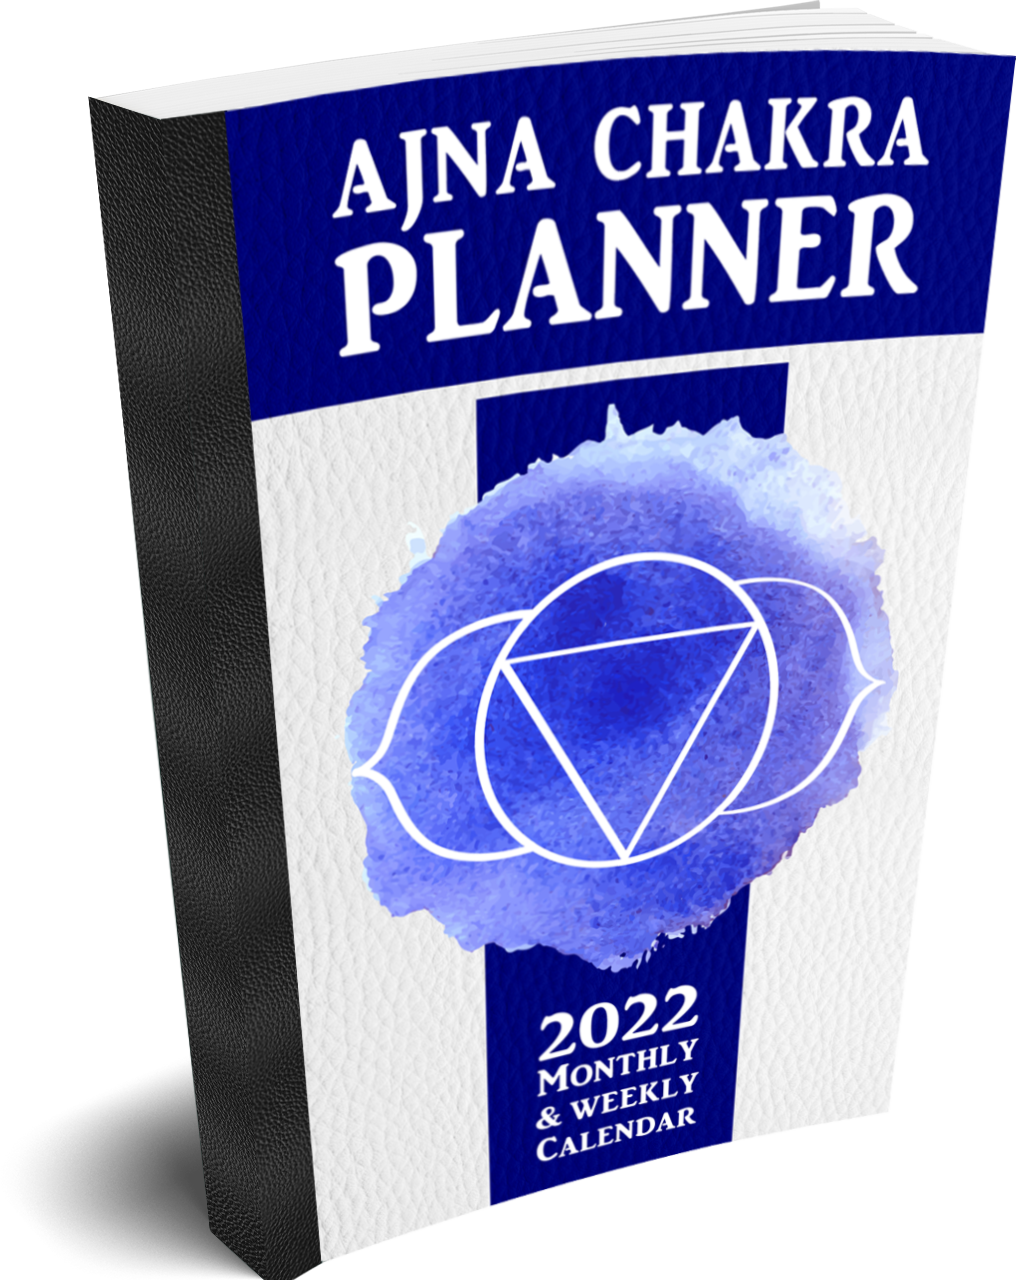 Ajna Chakra Planner—2022 Monthly & Weekly Calendar